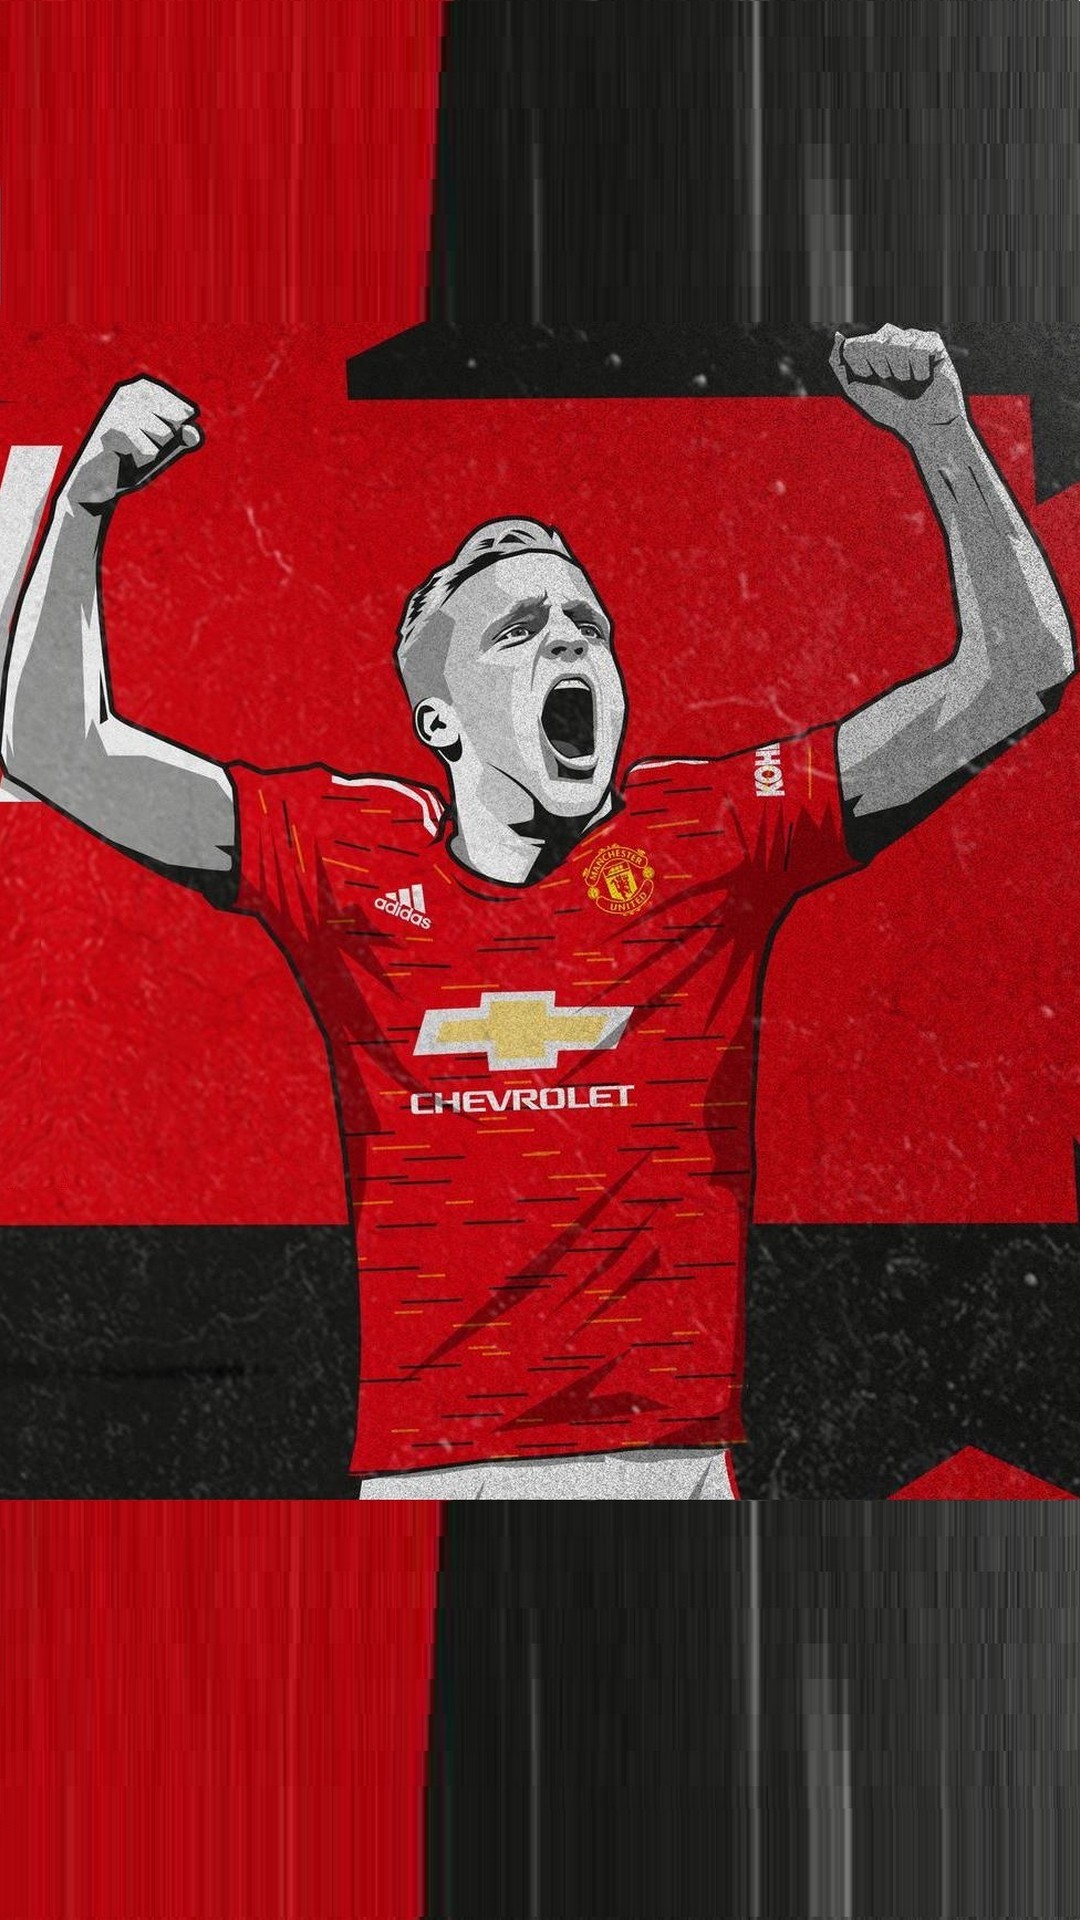 Donny Van De Beek Manchester United Wallpaper for Mobile with high-resolution 1080x1920 pixel. You can use this wallpaper for your Desktop Computers, Mac Screensavers, Windows Backgrounds, iPhone Wallpapers, Tablet or Android Lock screen and another Mobile device